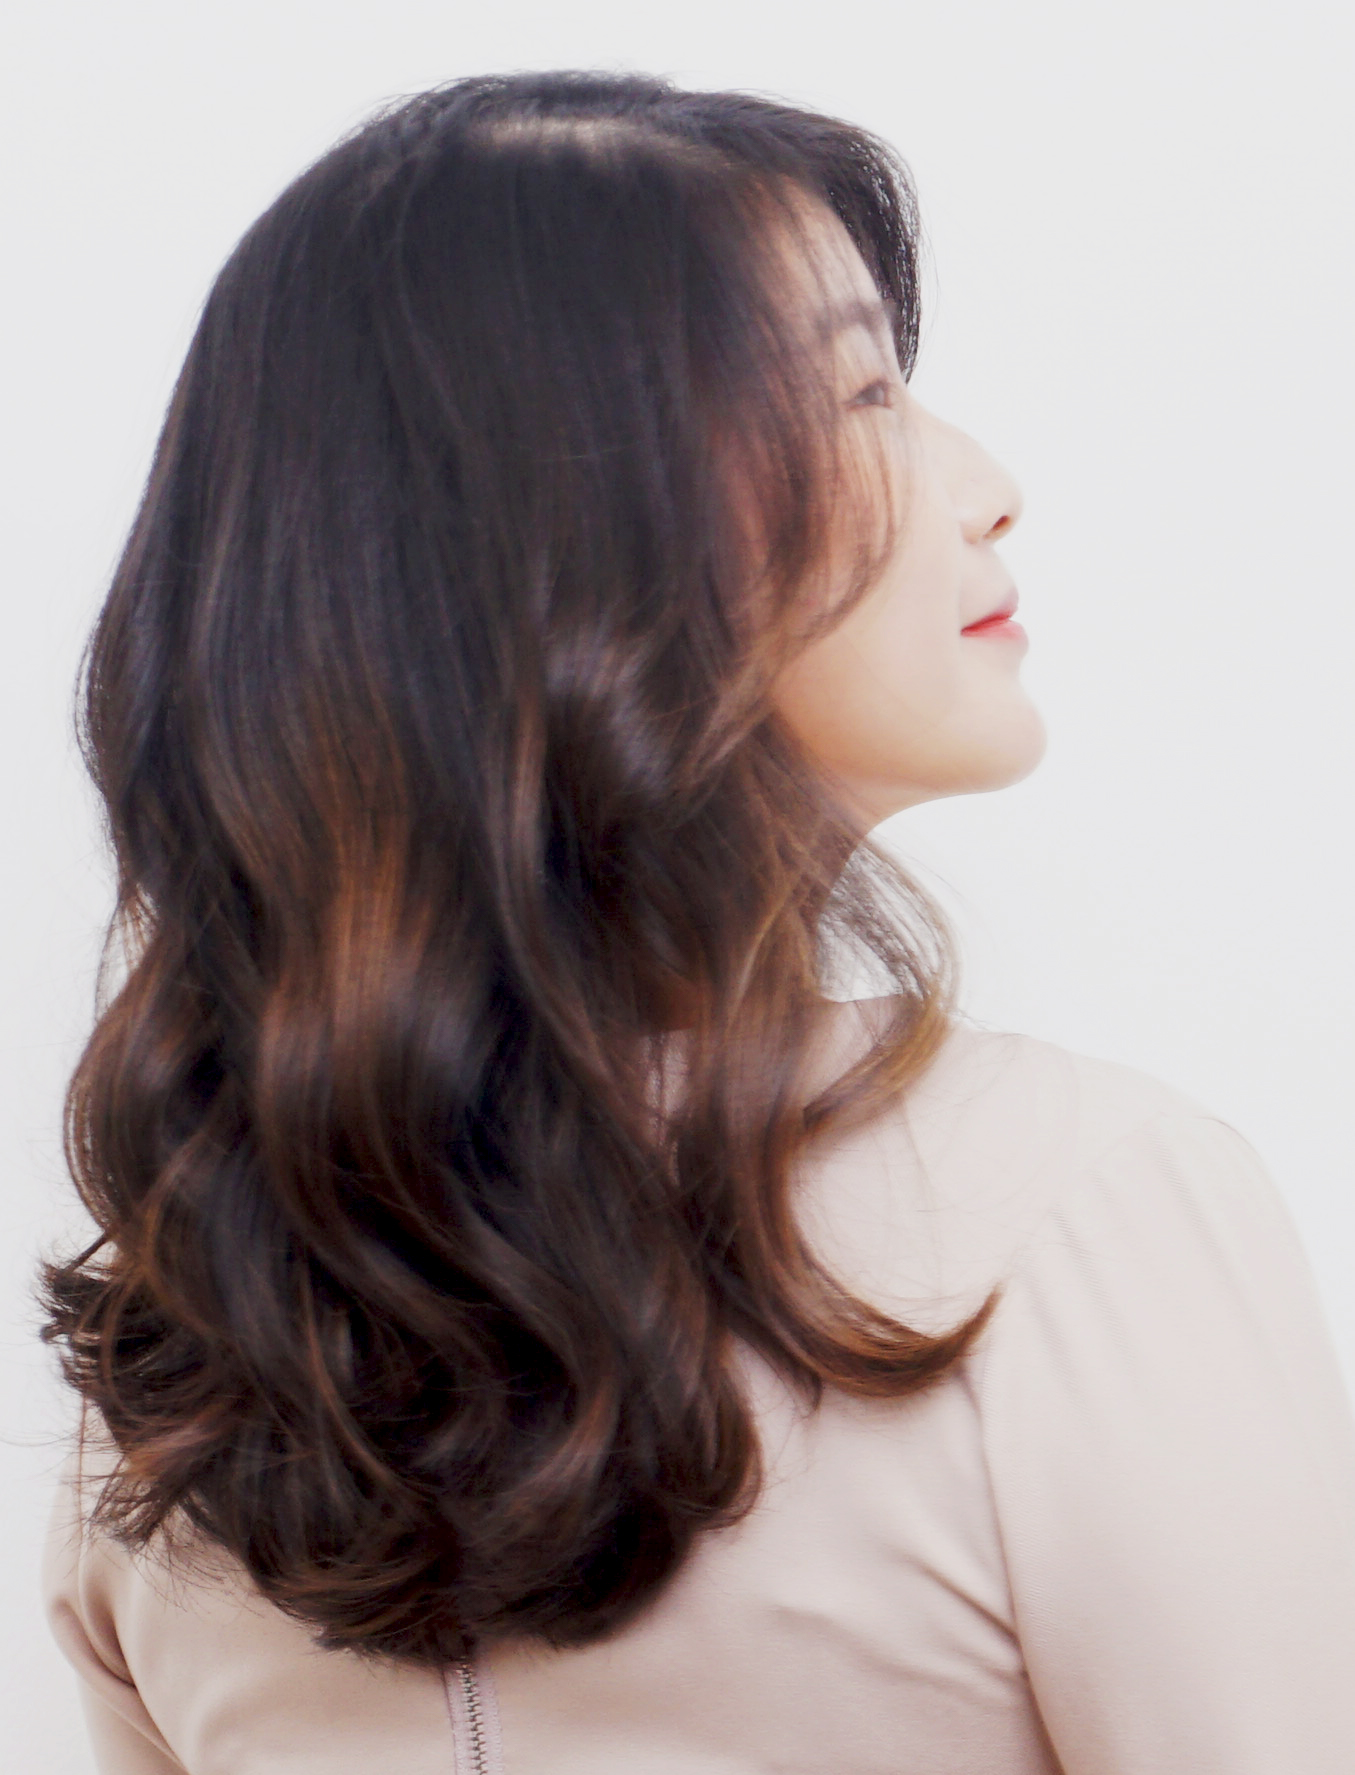 Perm Hair Services in Singapore 5